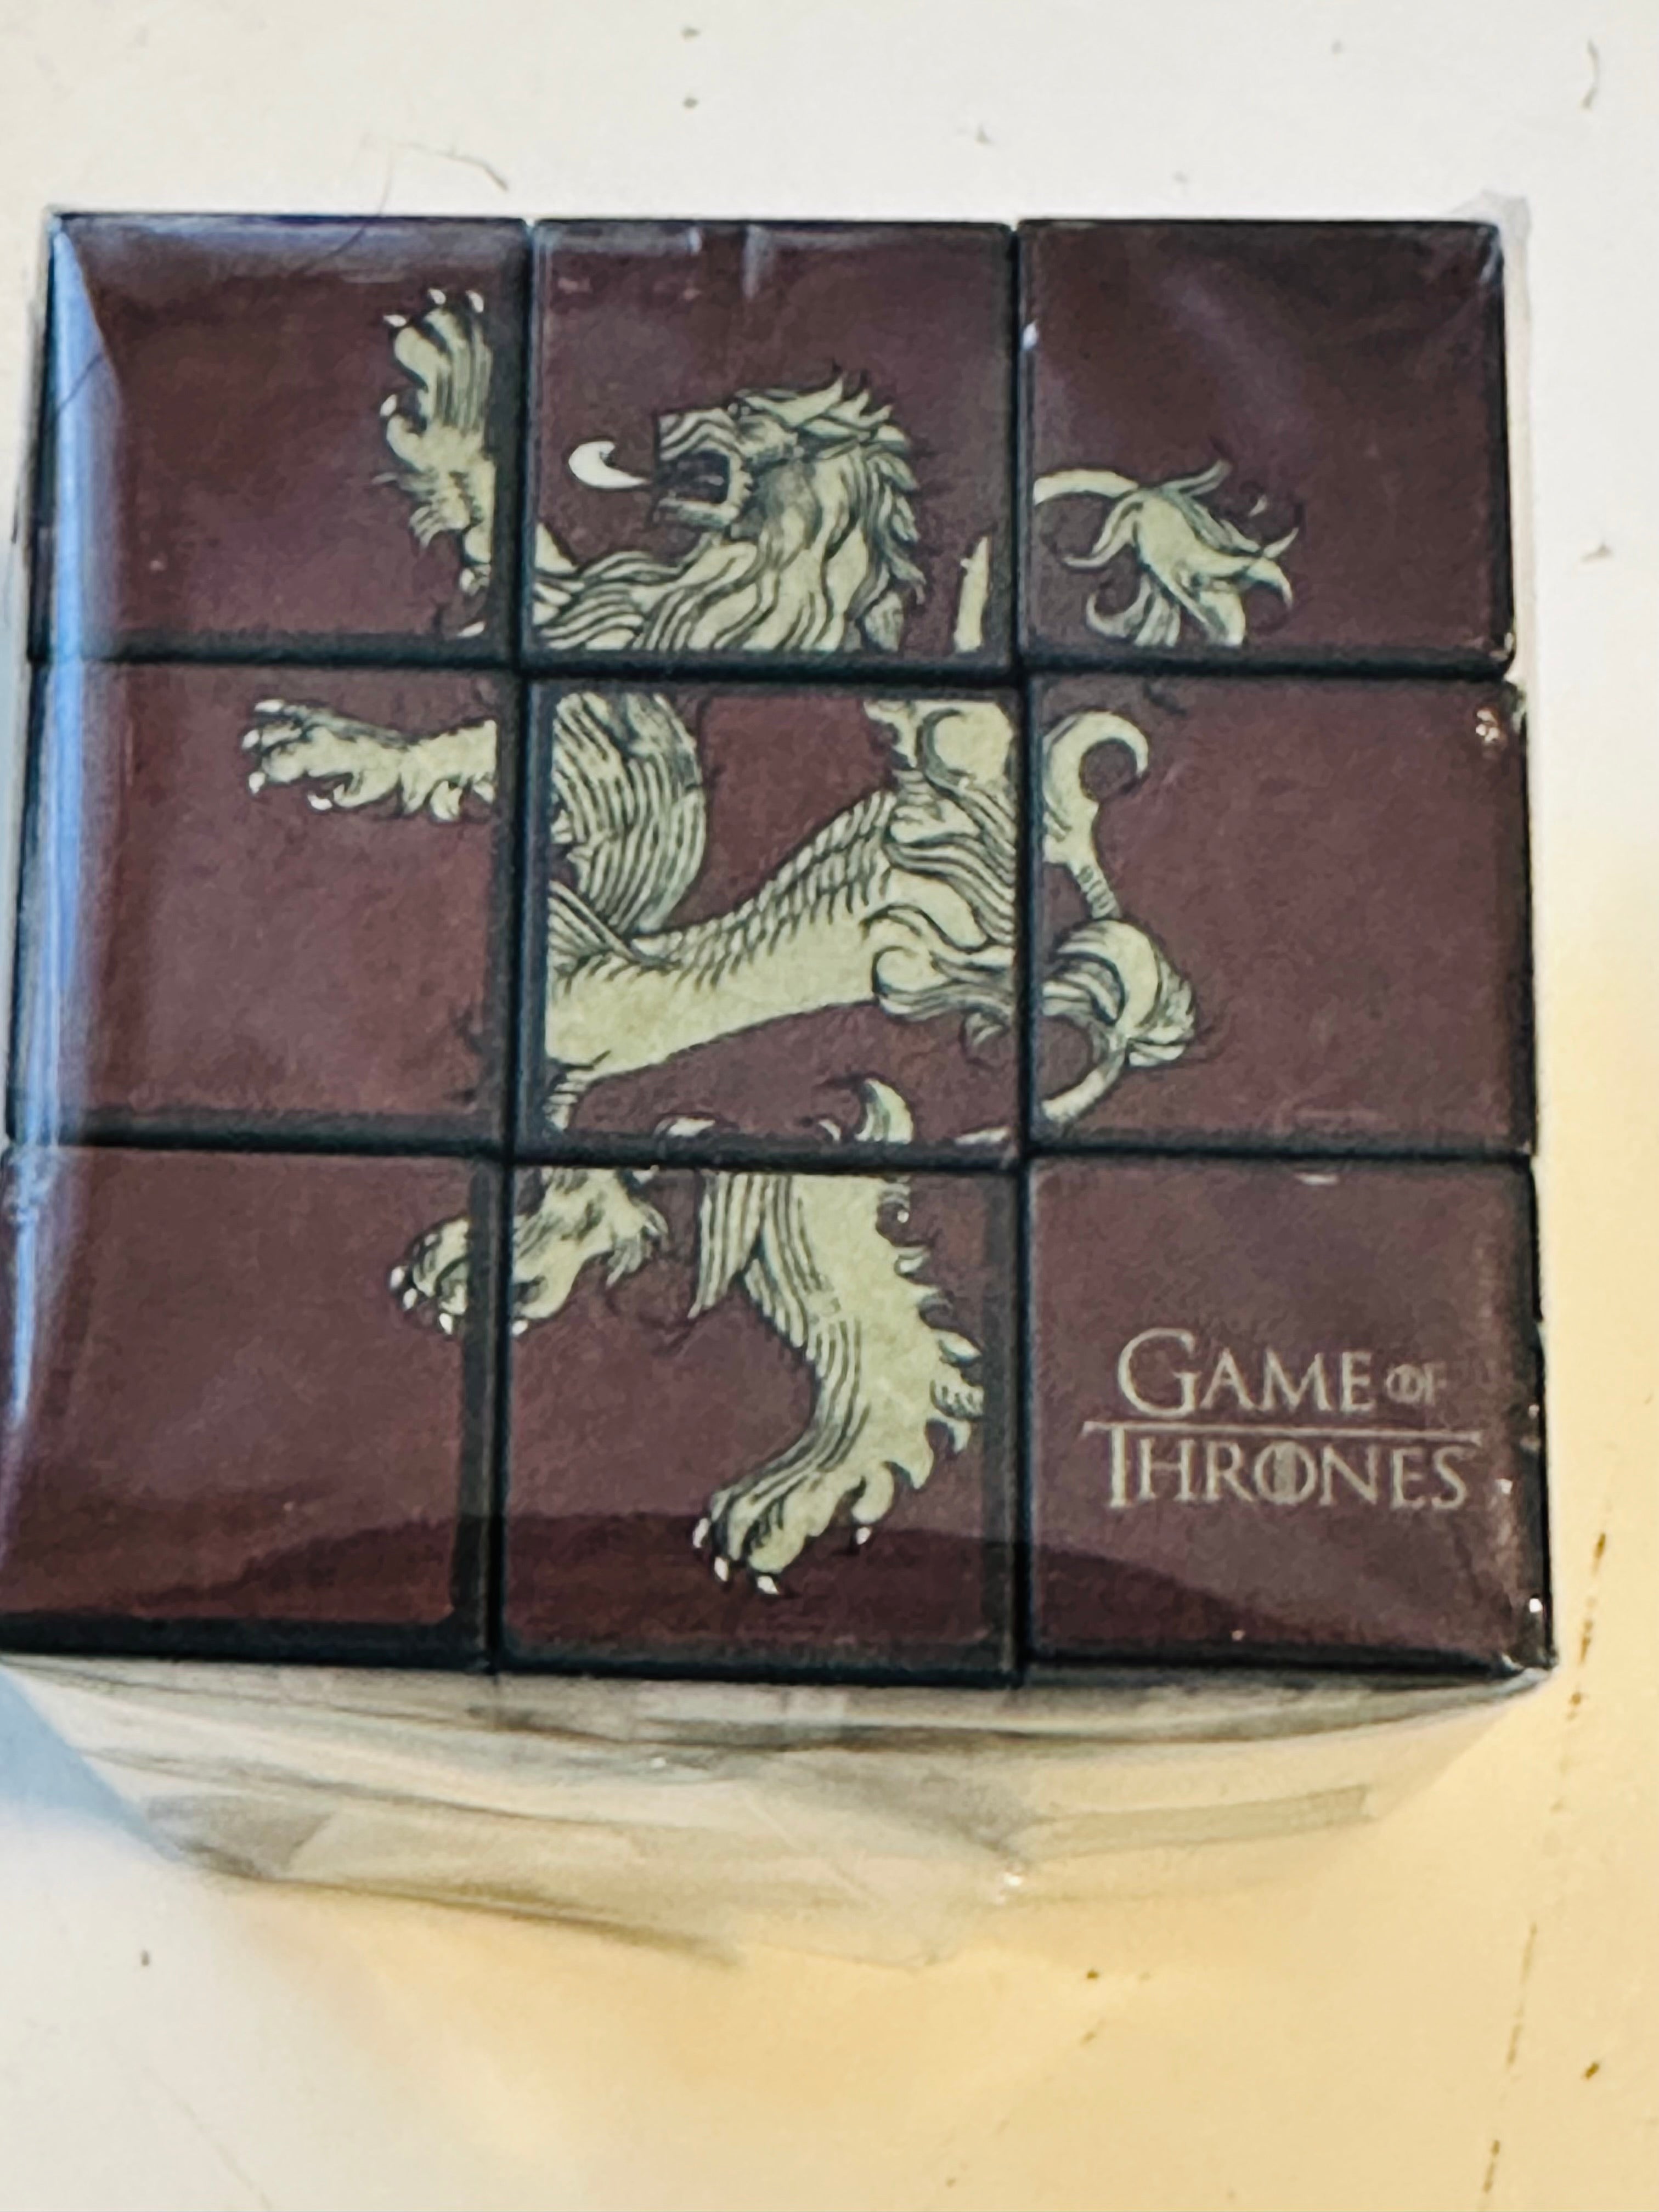 Game of Thrones HBO rare limited issued Rubix cube